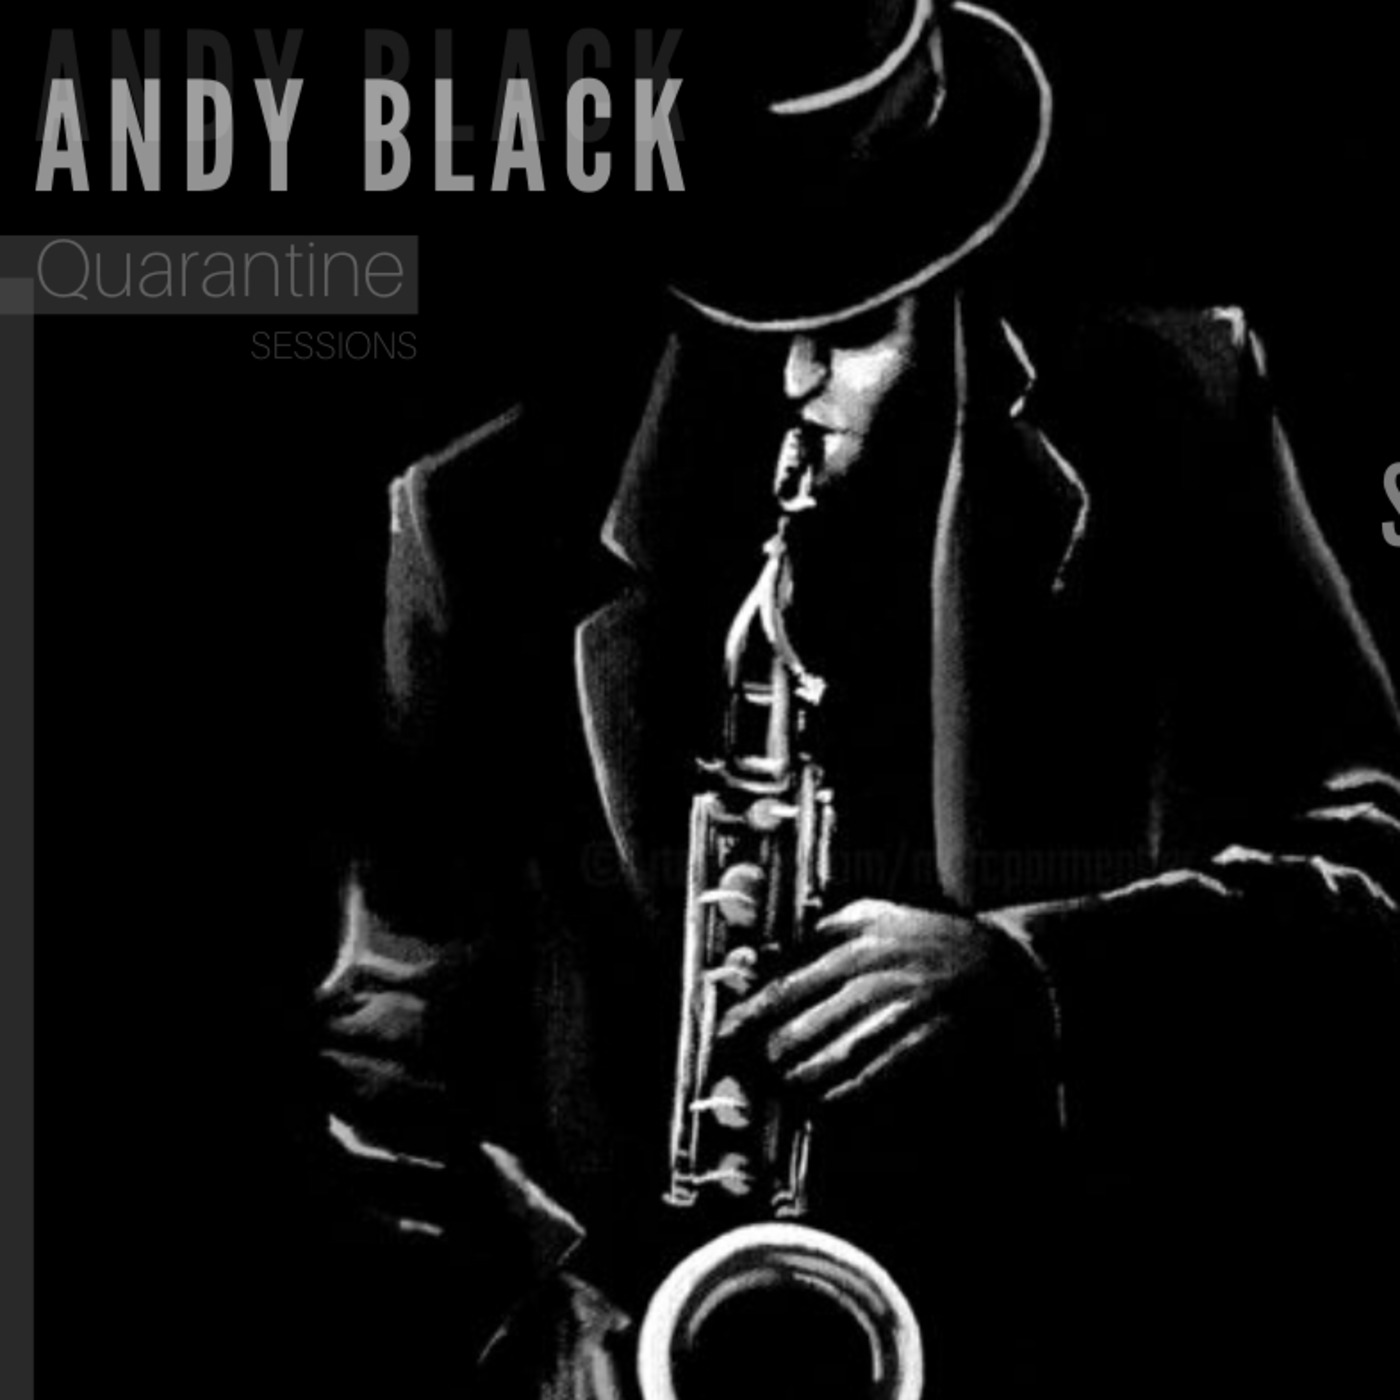 Andy Black Quarantine Sessions (Soulful House - Sax Edition) Episode 27